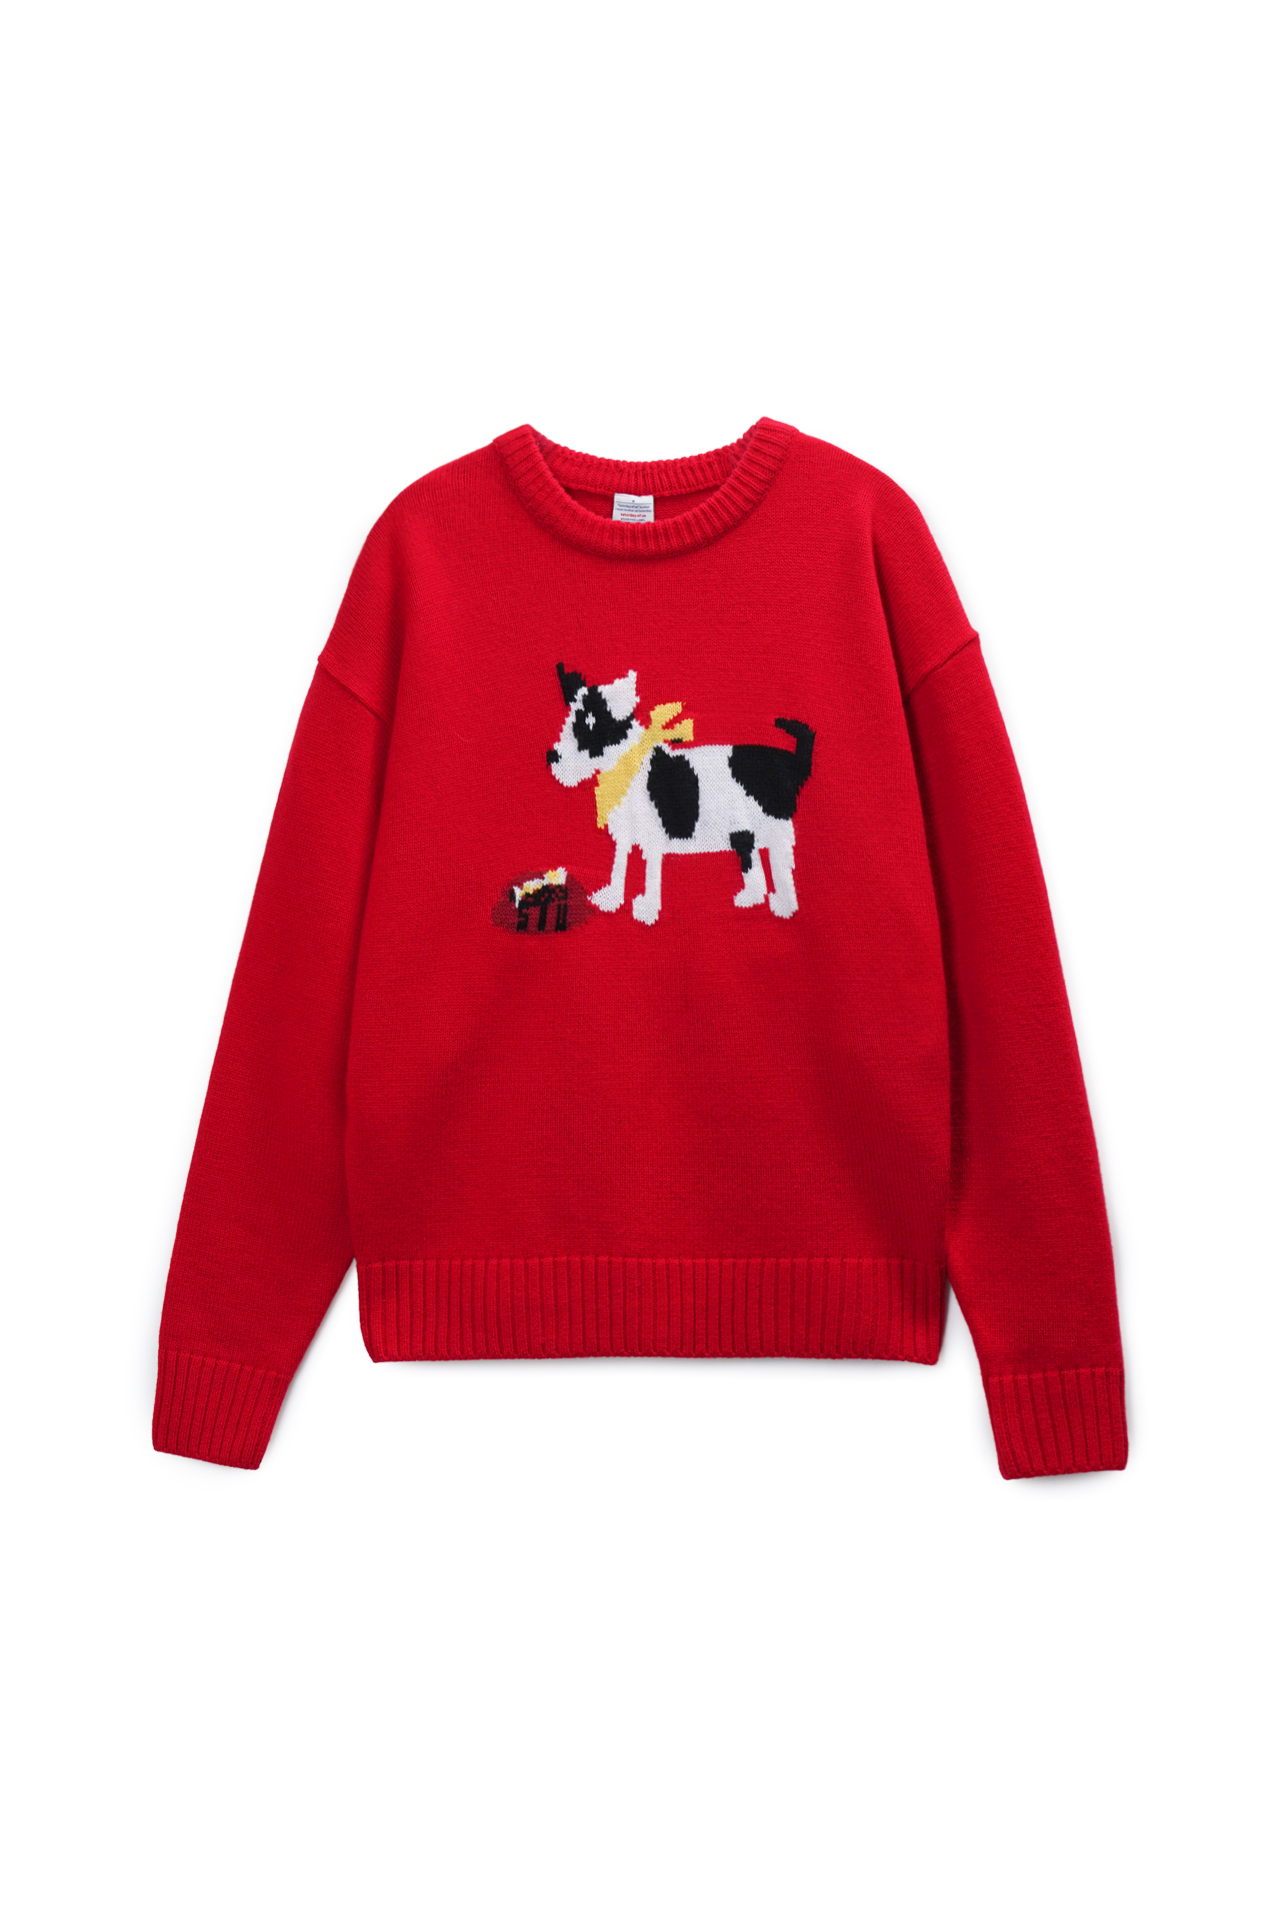 Fox Terrier Knit Red